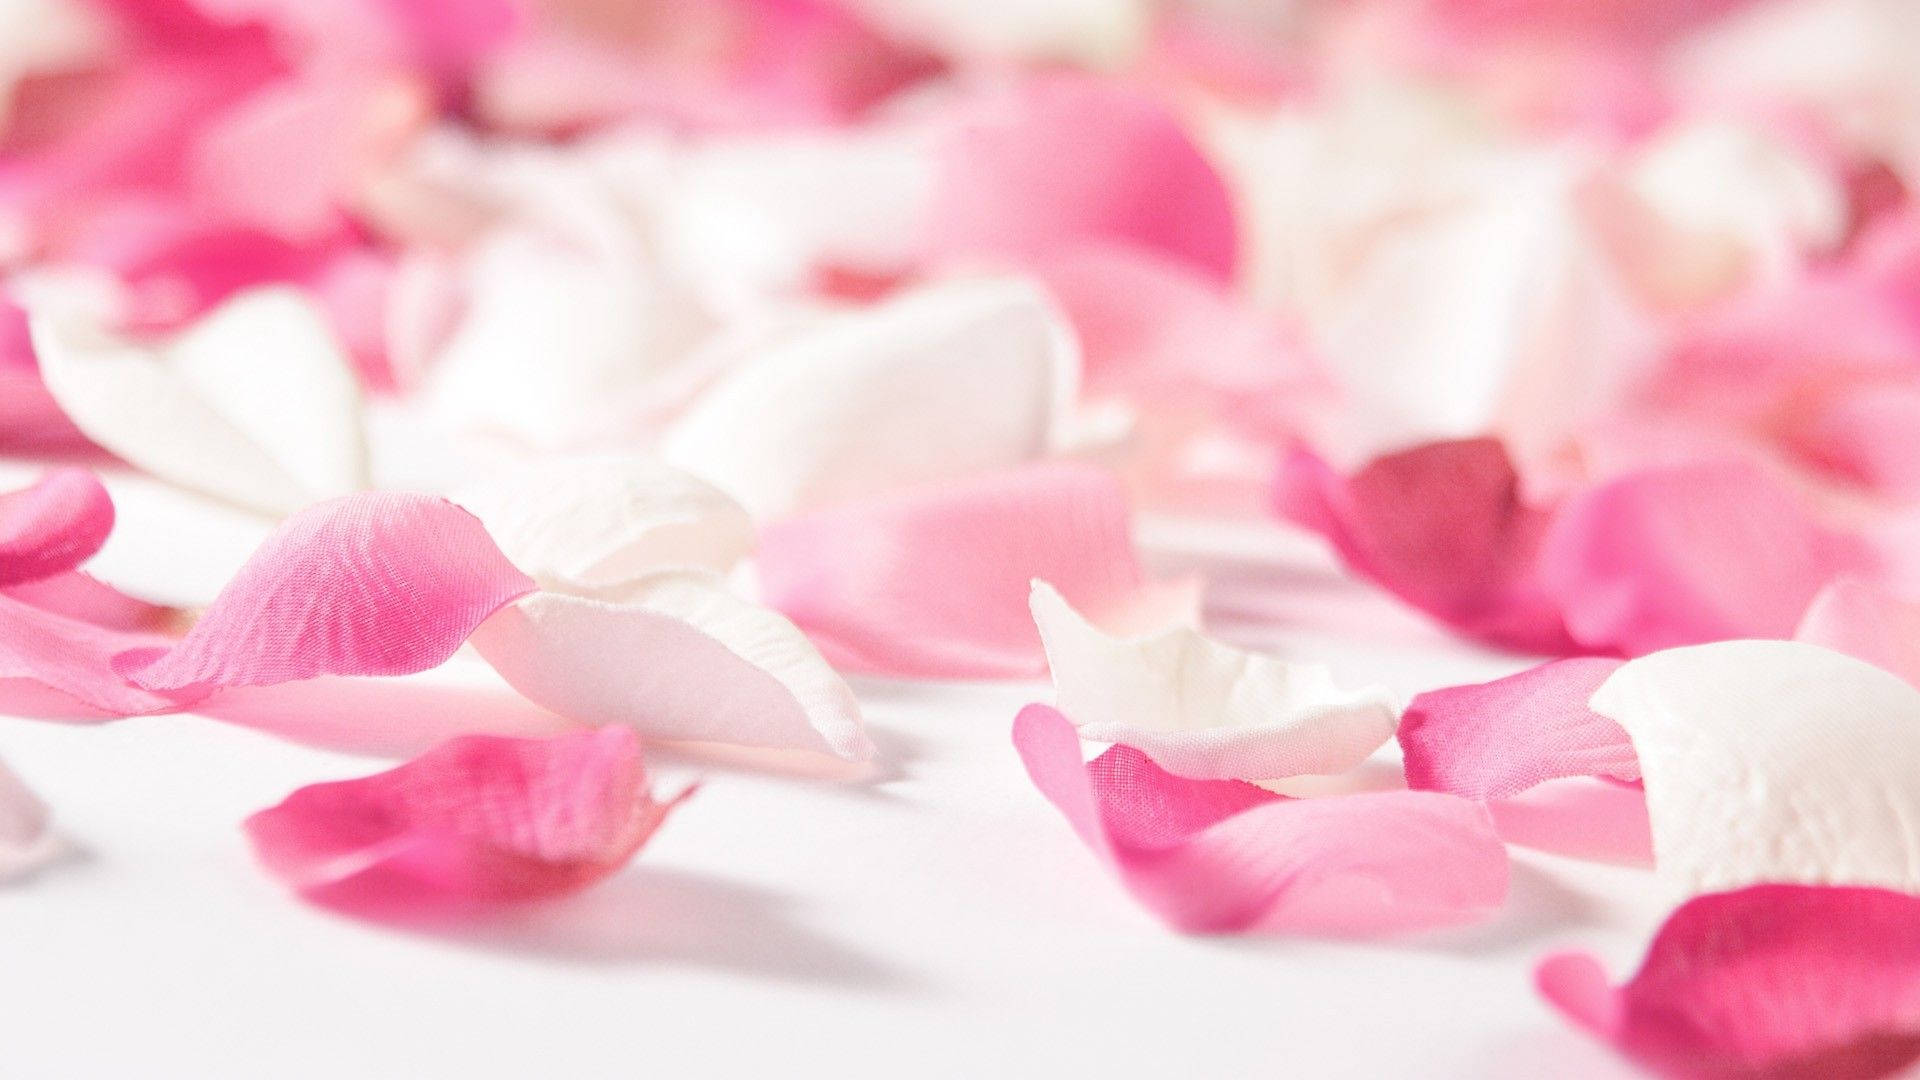 Scattered Cute Pink Flower Petals Background